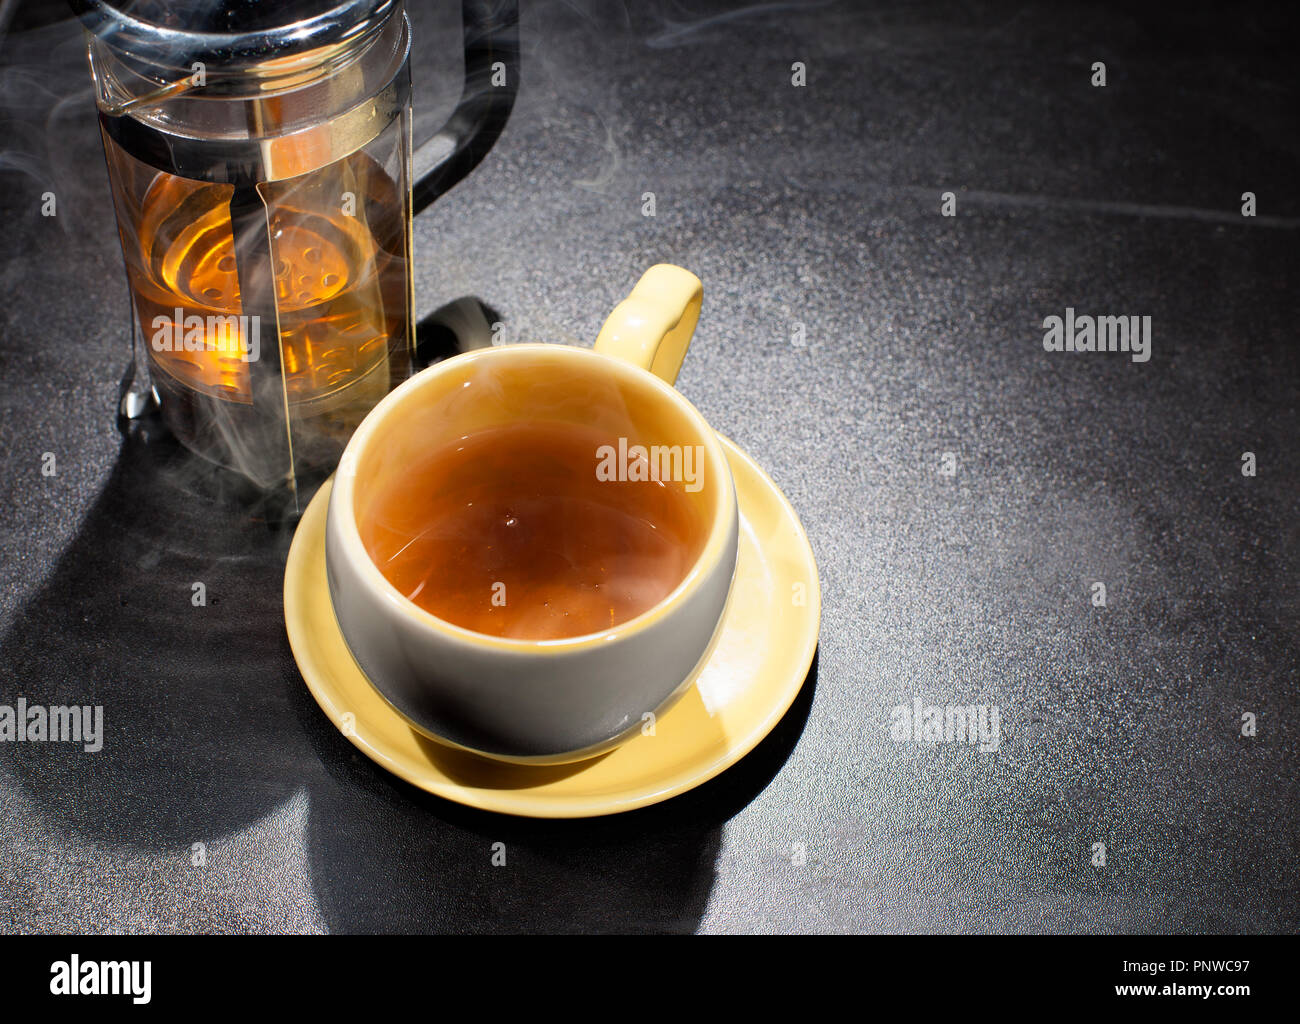 Smoky hot tea in a cup with a tea press maker Stock Photo